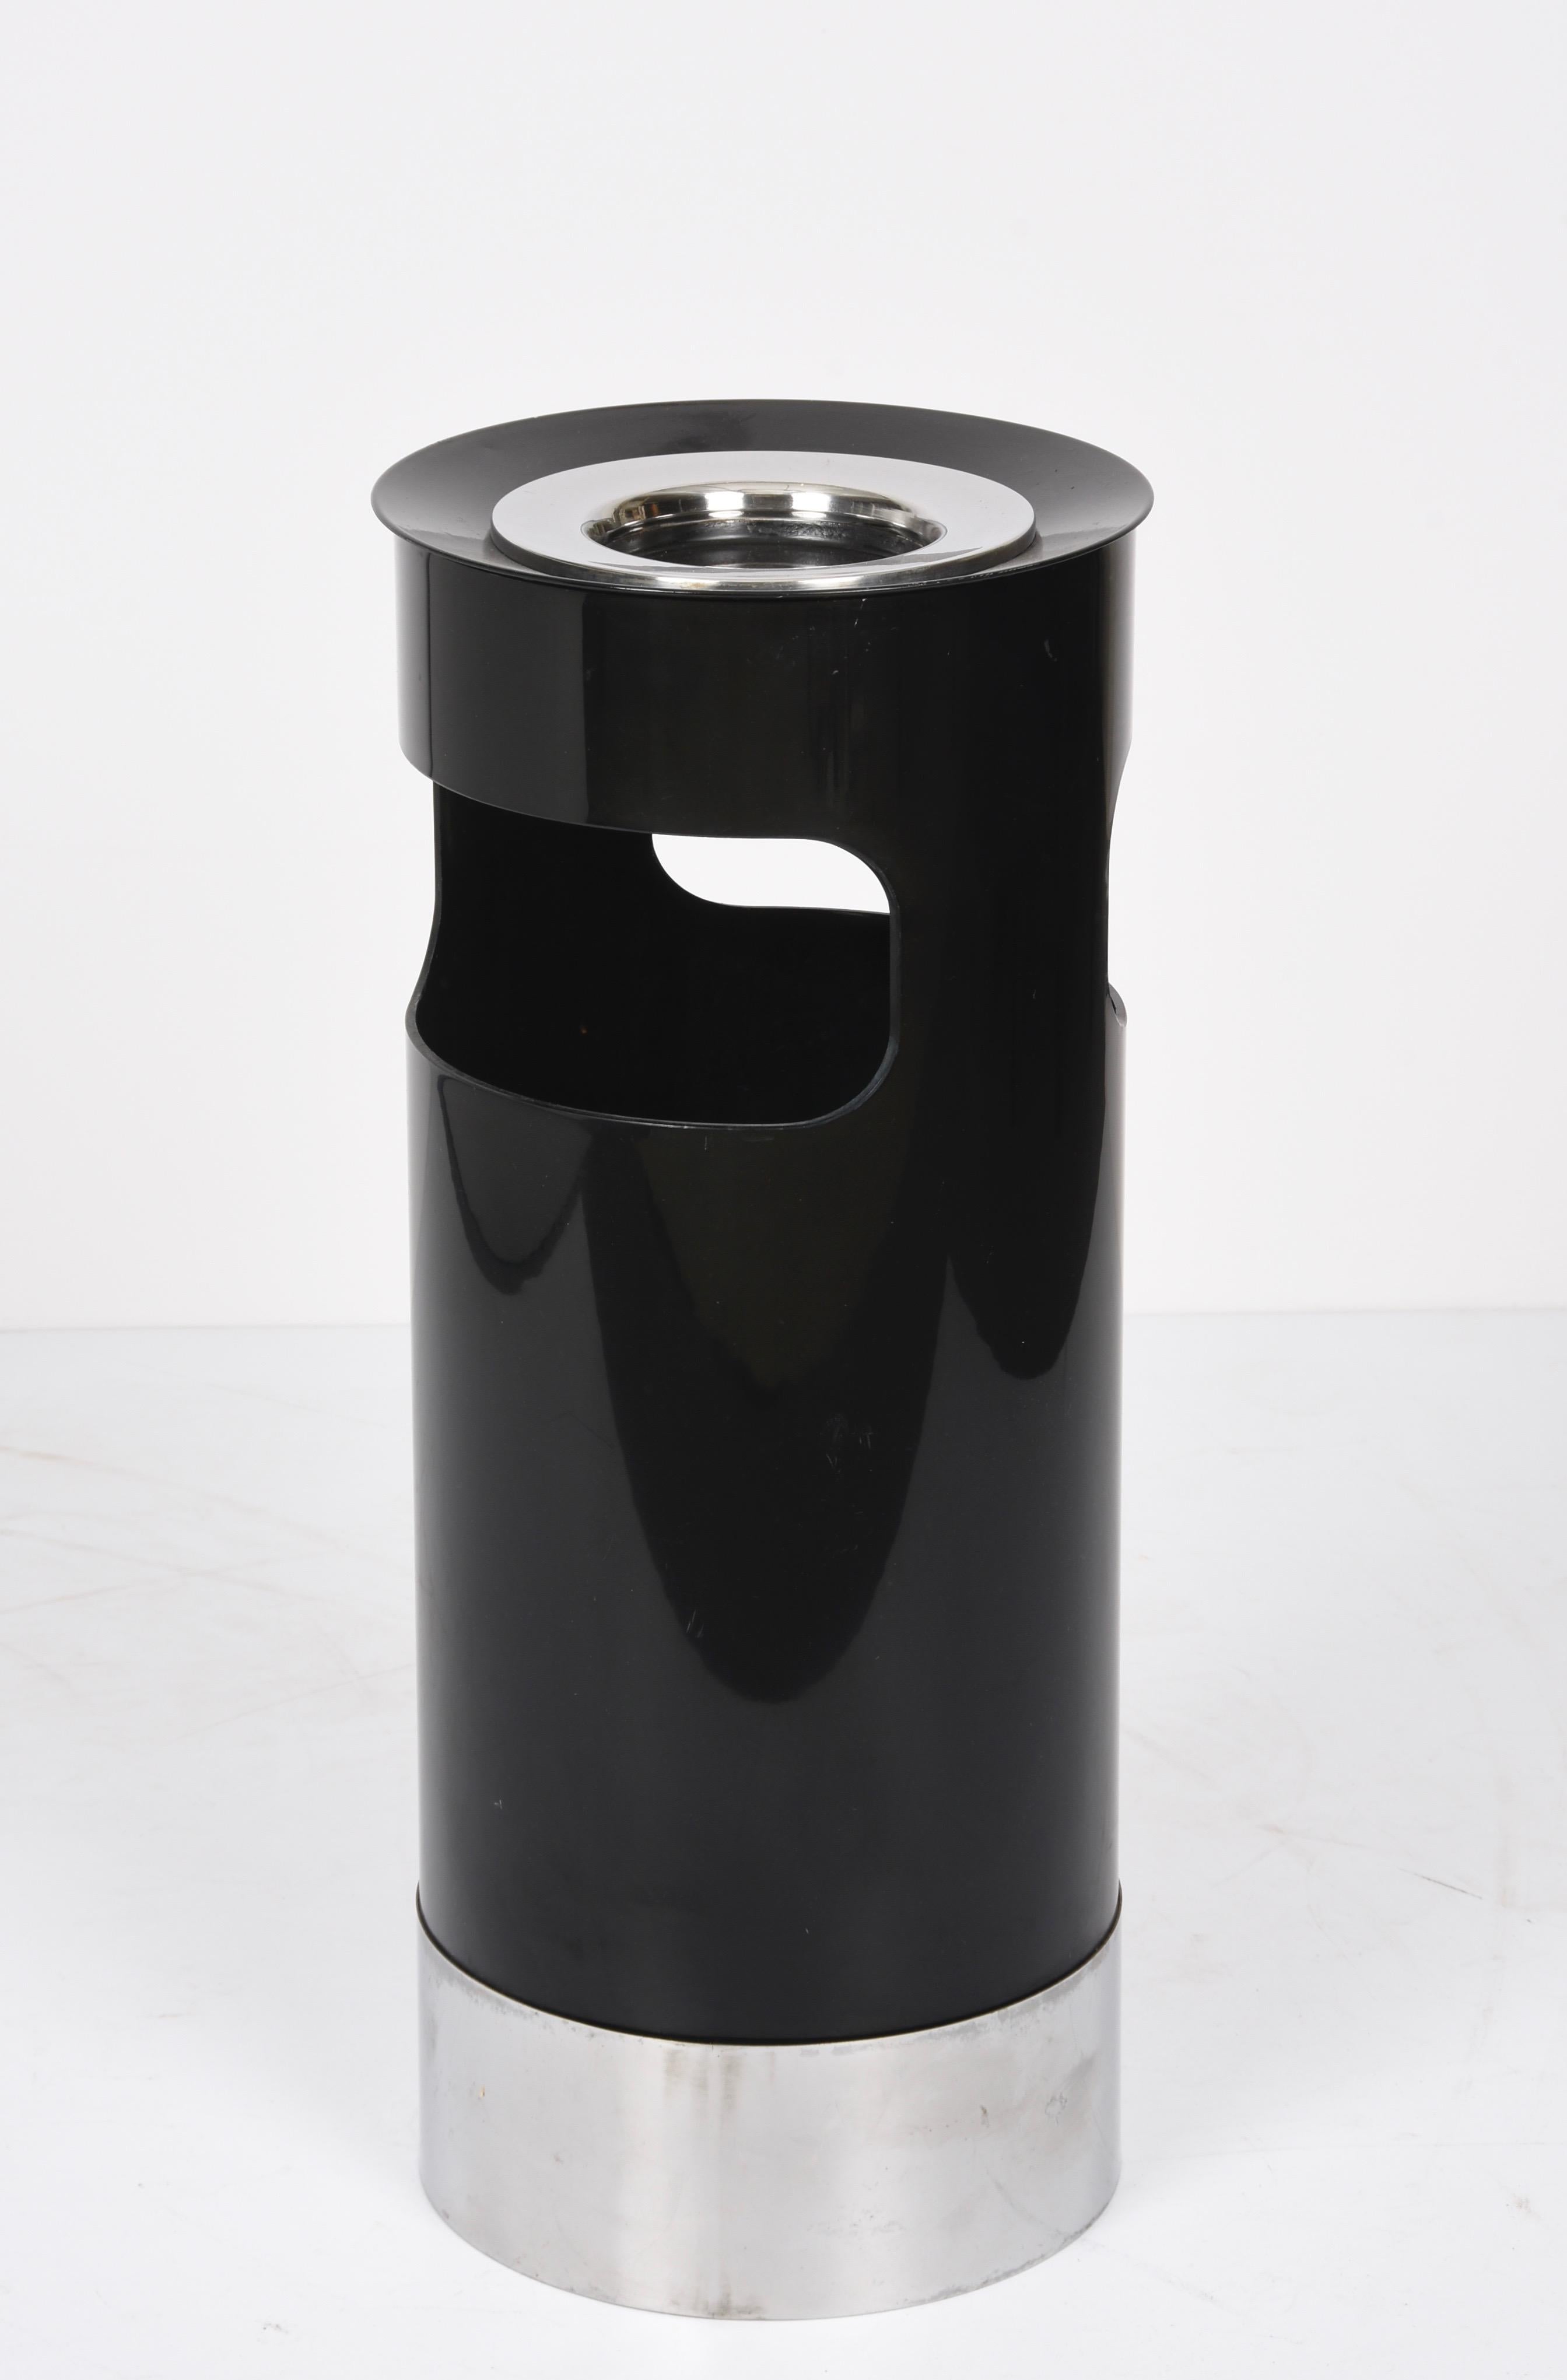 Gino Colombini Midcentury Black Umbrella Stands or Ashtray for Kartell, 1970 For Sale 10